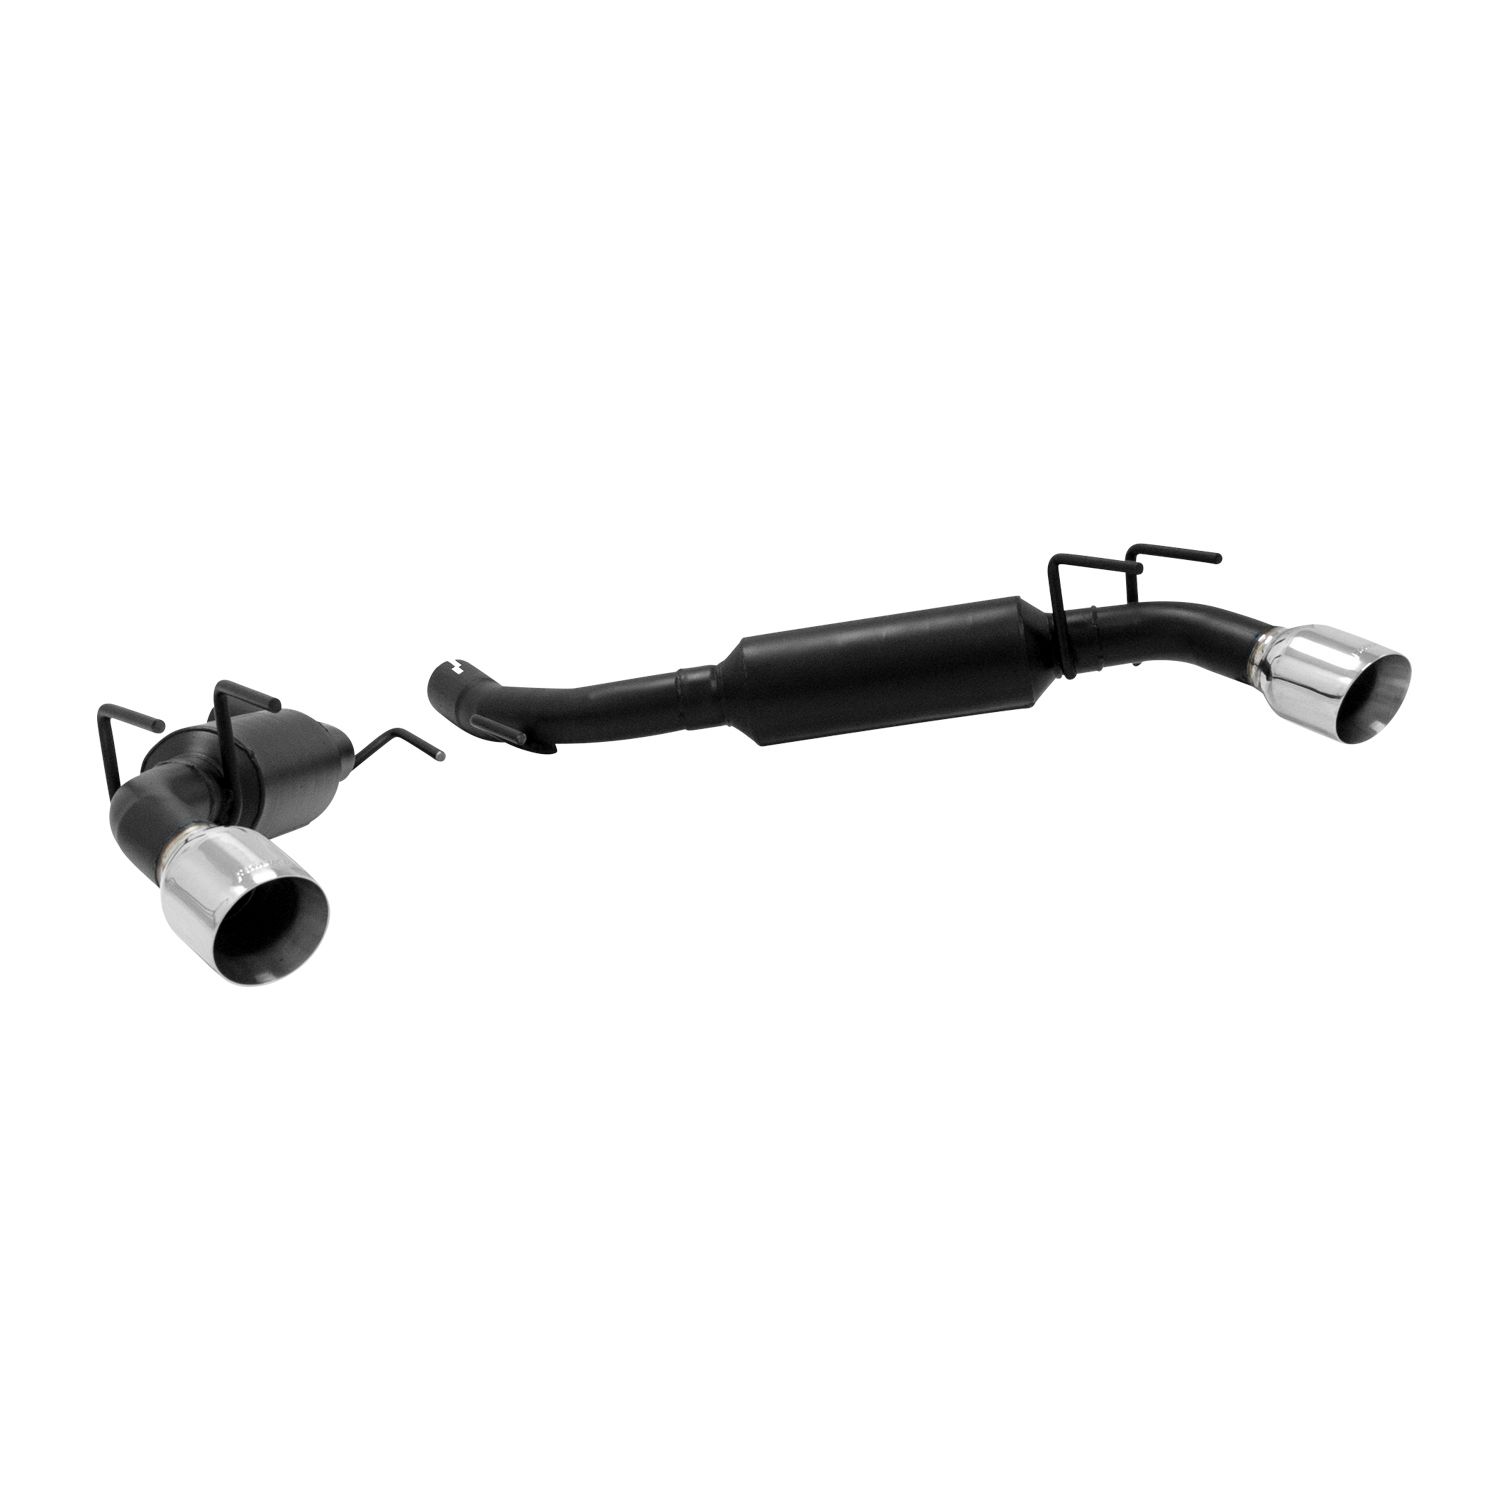 2014-2015 Chevrolet Camaro SS 6.2L Flowmaster Outlaw Axle-Back Exhaust